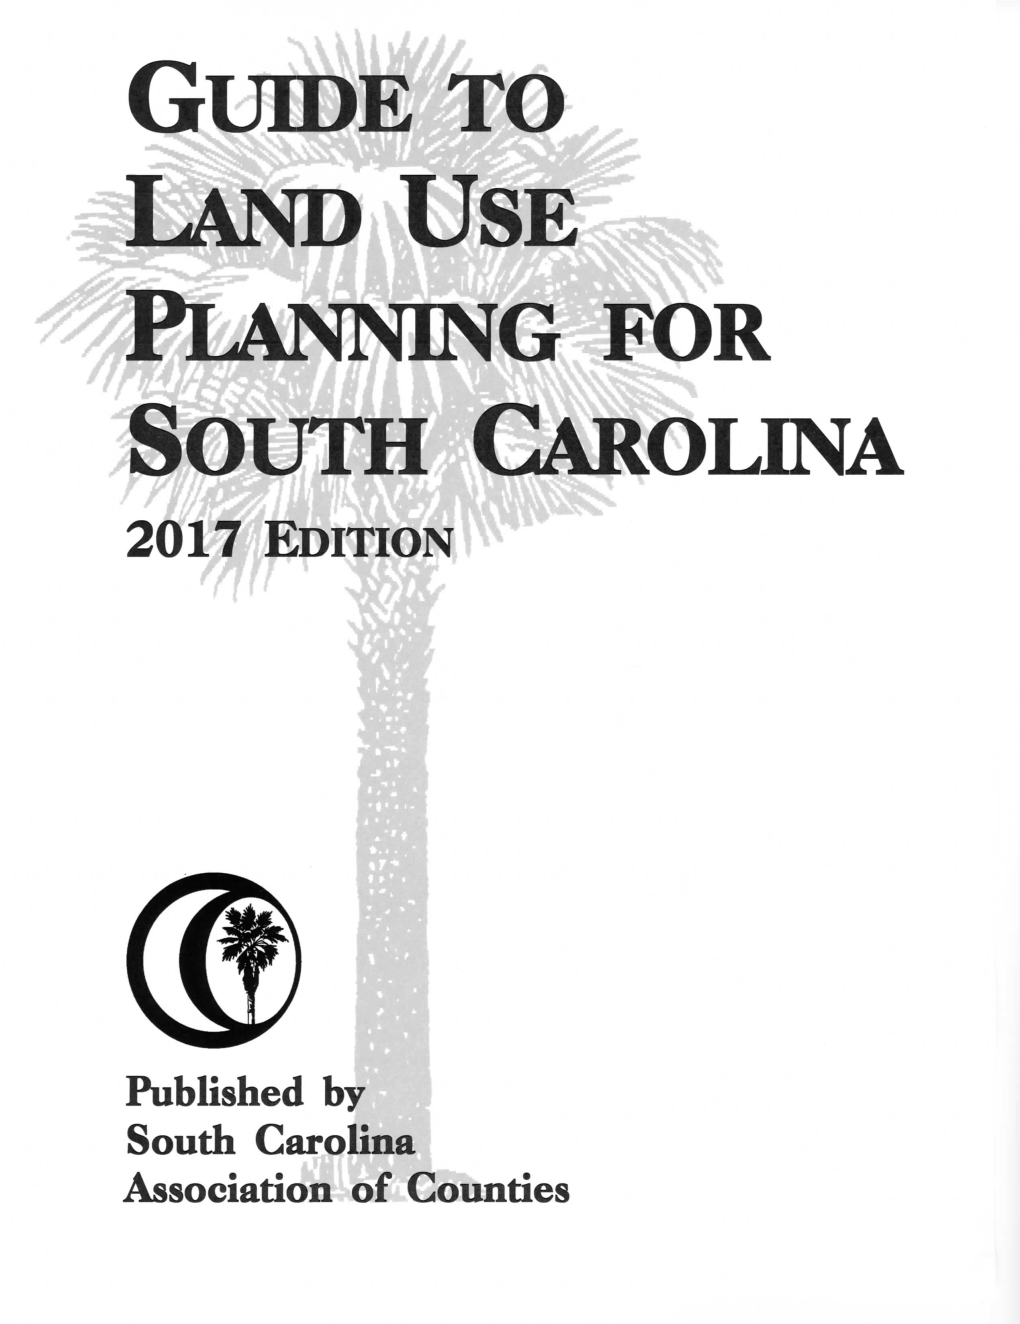 Guide to Land Use Planning for South Carolina 2017 Edition